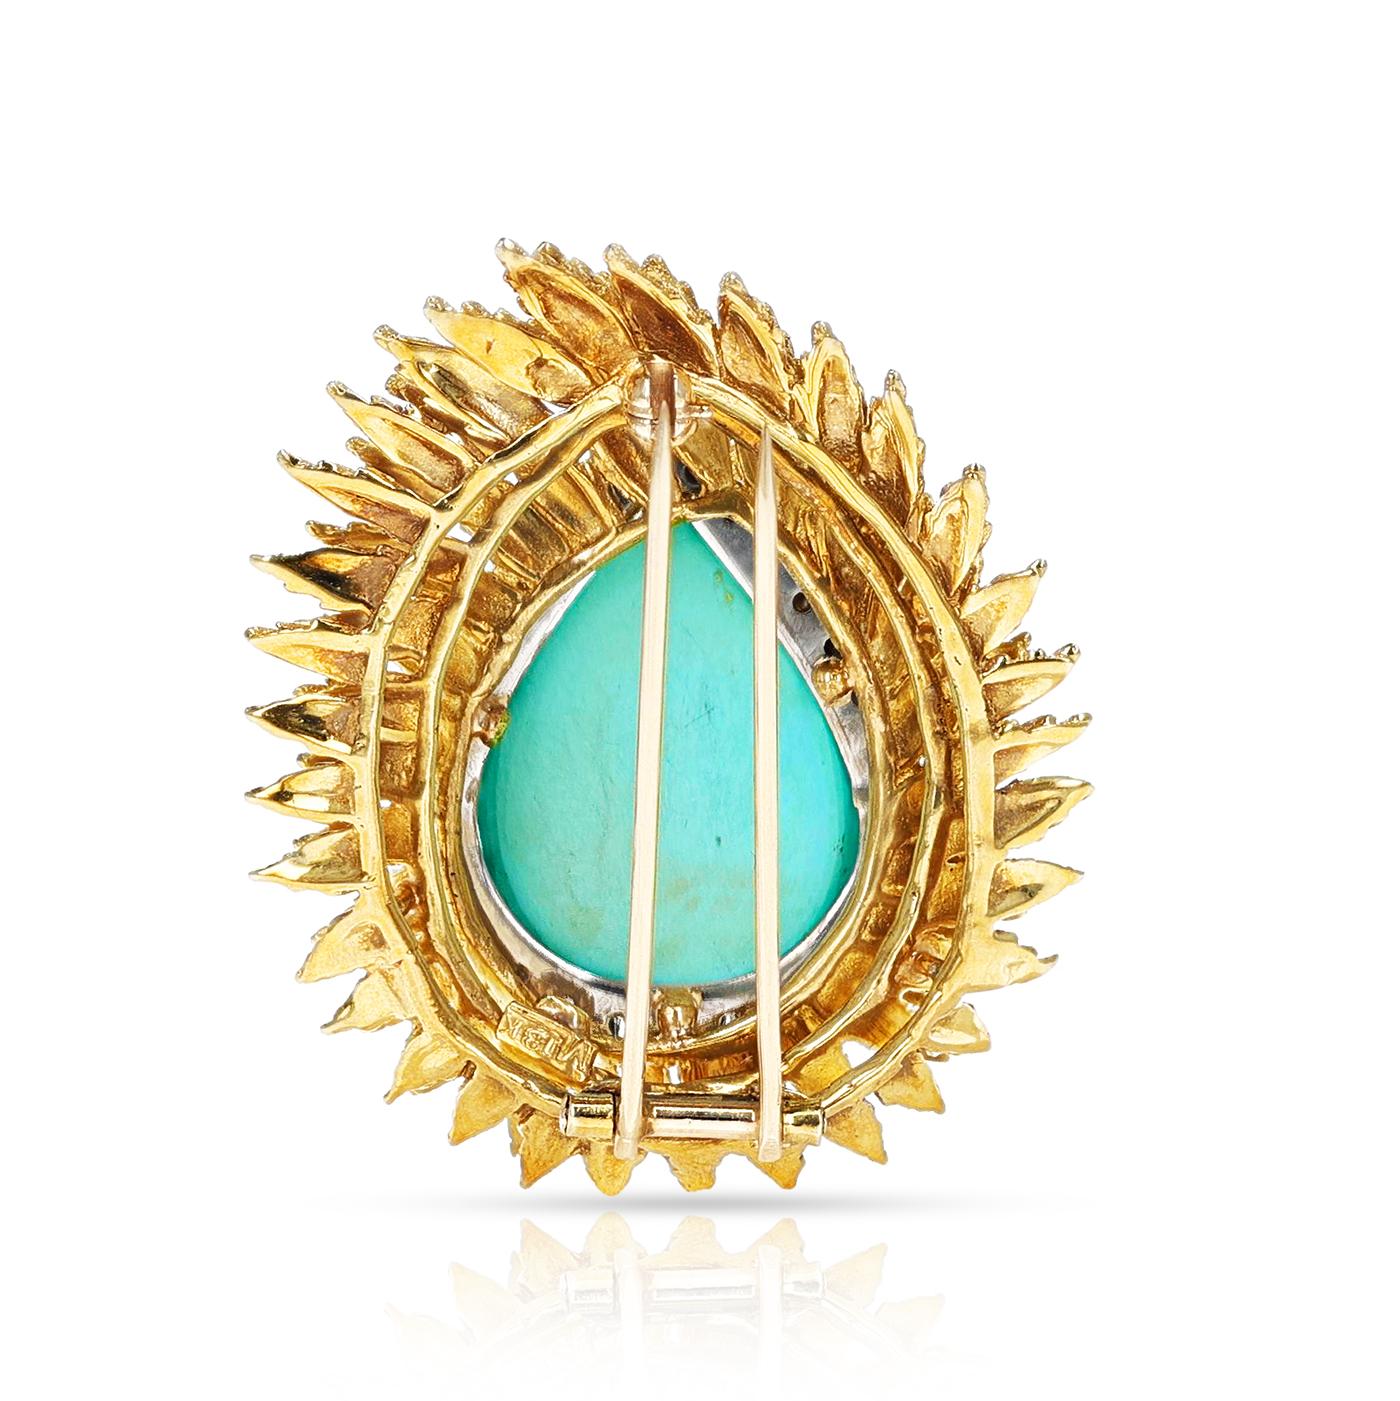 A Pear-Shape Turquoise and Diamond Leaf Brooch made in 18k Yellow Gold. The diamonds weigh appx. 1.60 cts. The total weight of the brooch is 27.22 grams. The Brooch Measurements are 47.23 x 36.85 MM and the Turquoise Measurements are 23.67 x 16.88